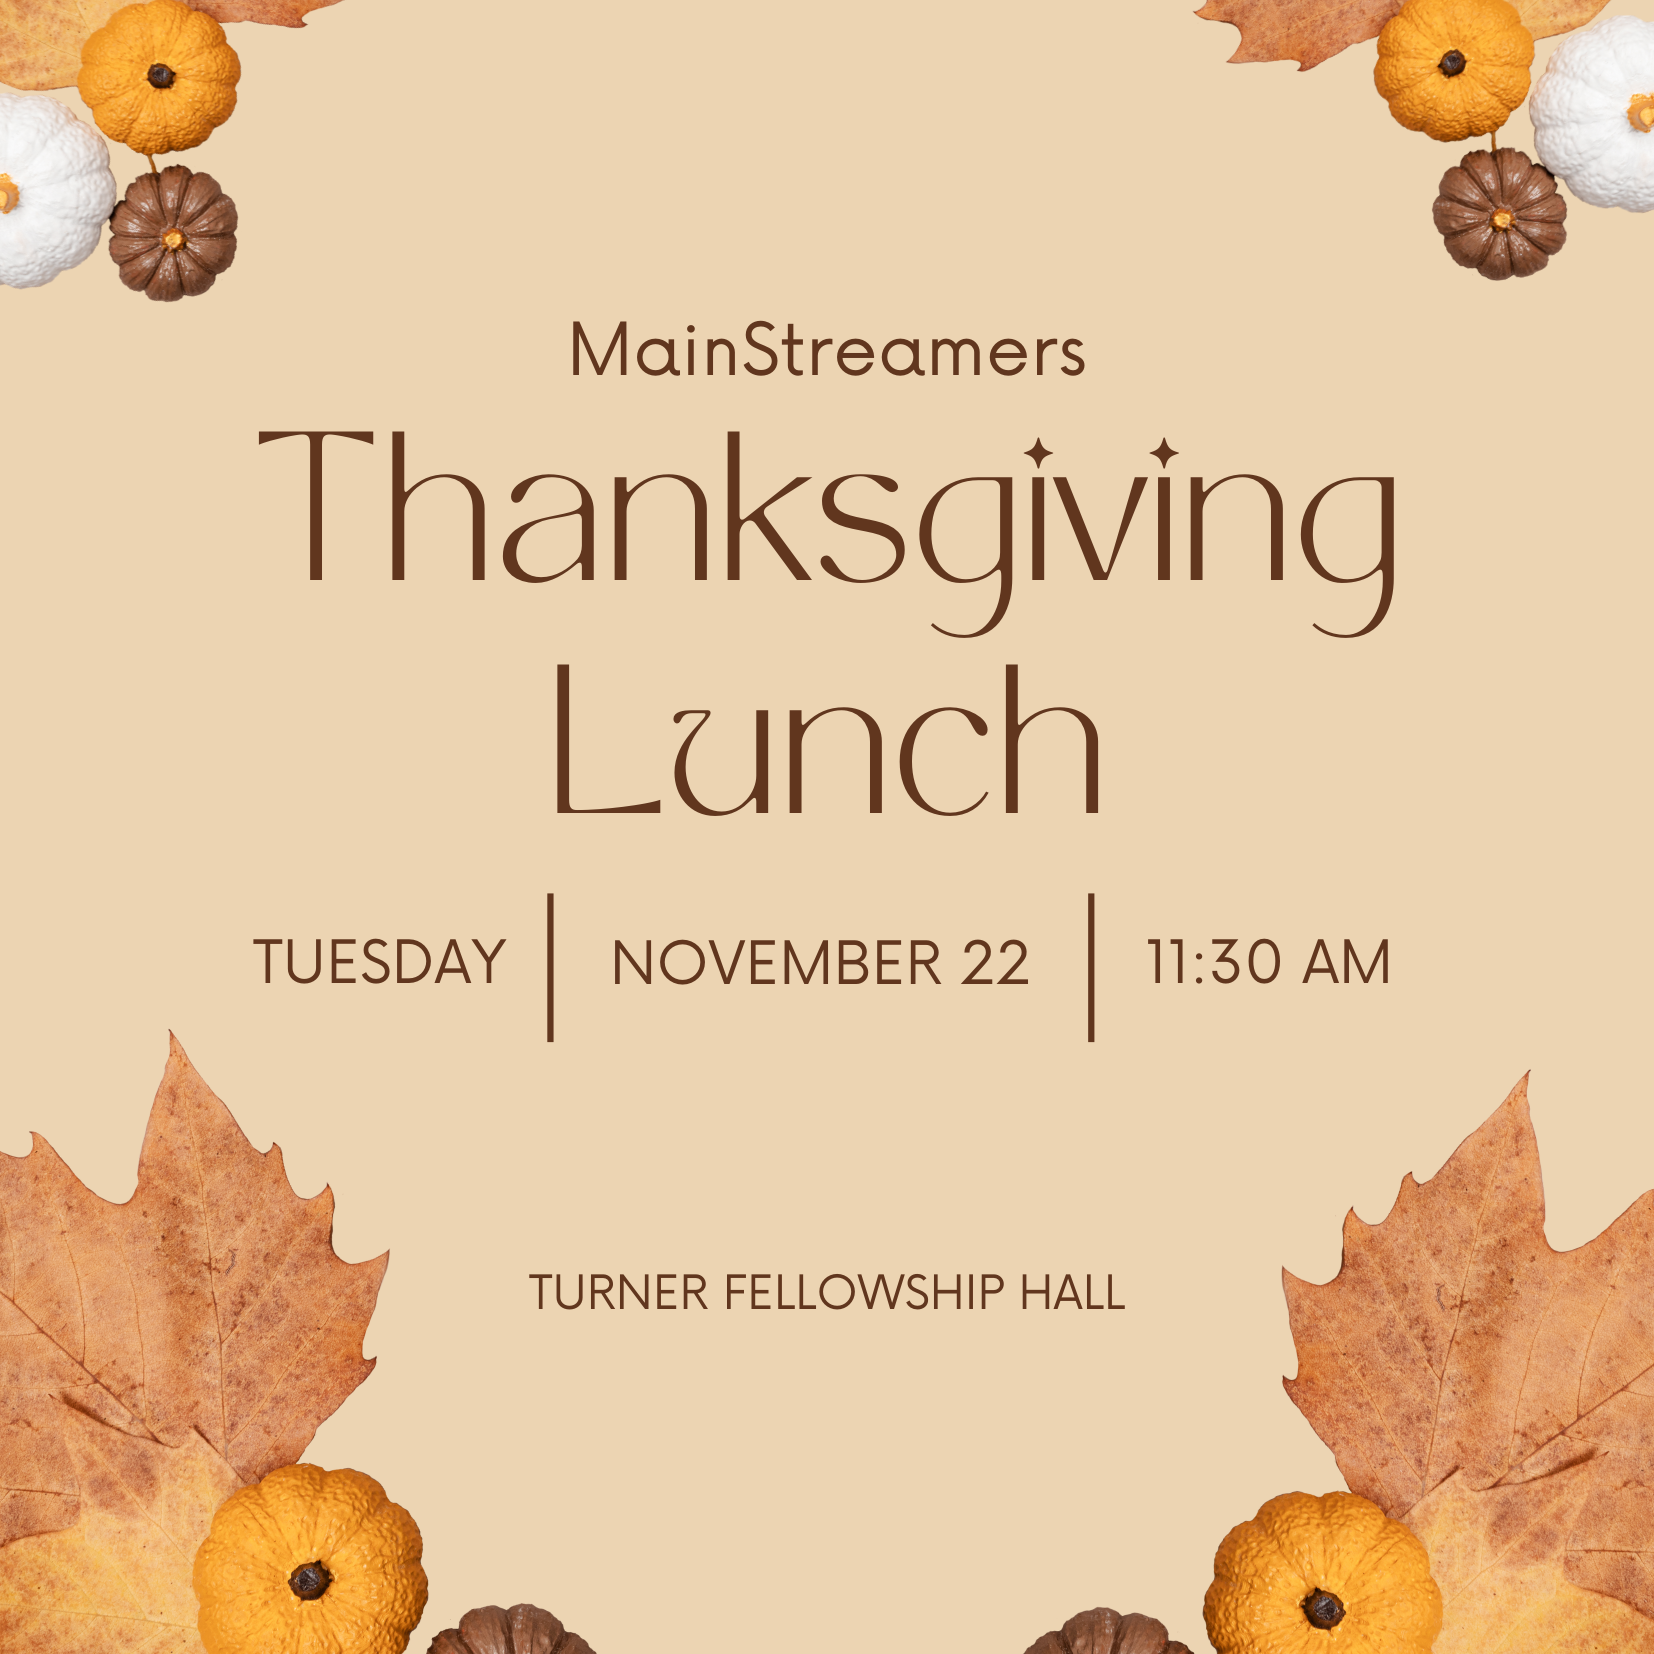 MainStreamers Thanksgiving Lunch